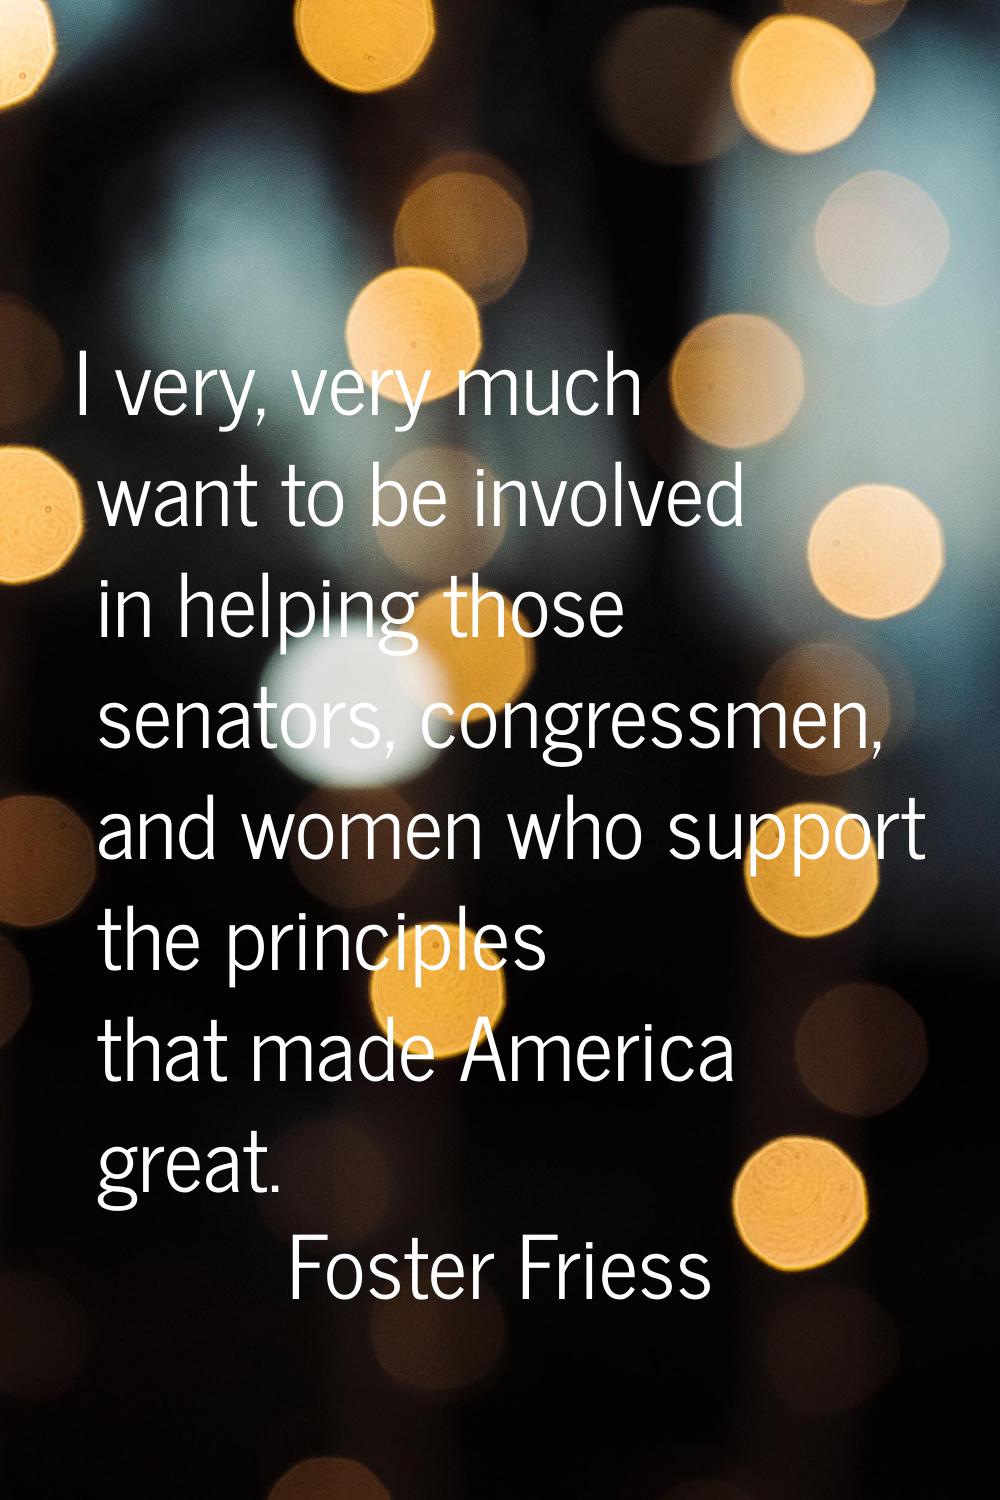 I very, very much want to be involved in helping those senators, congressmen, and women who support